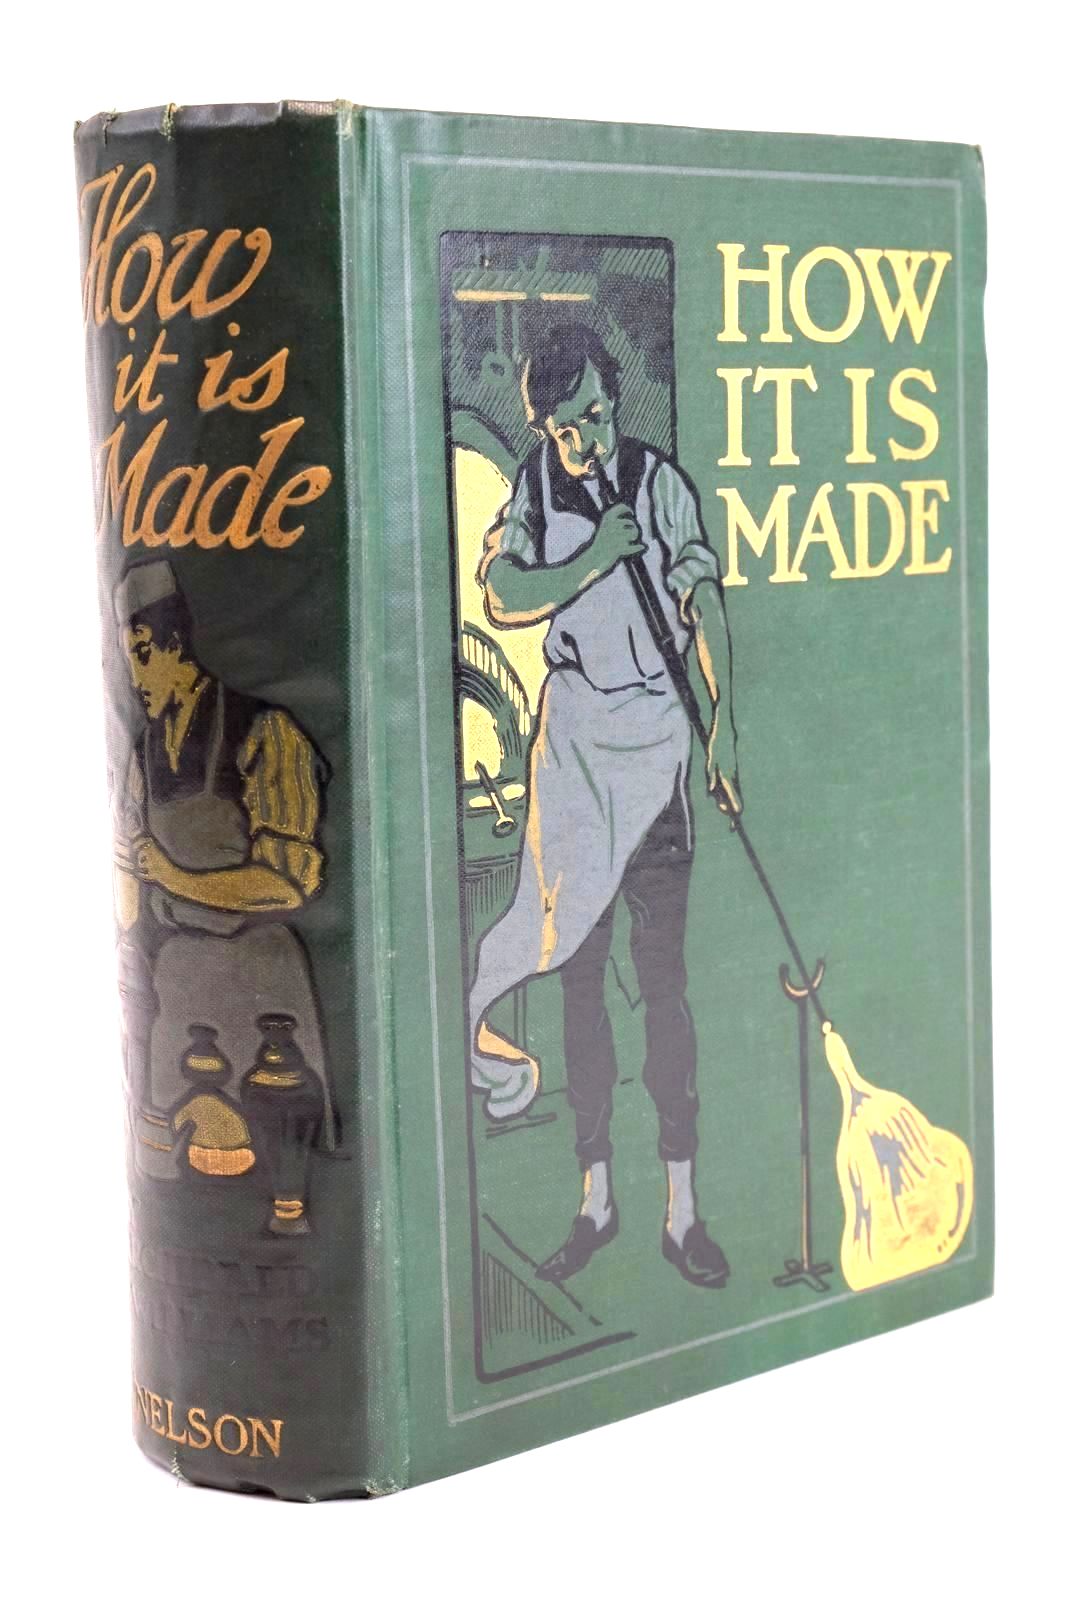 Photo of HOW IT IS MADE written by Williams, Archibald published by Thomas Nelson and Sons Ltd. (STOCK CODE: 1324482)  for sale by Stella & Rose's Books